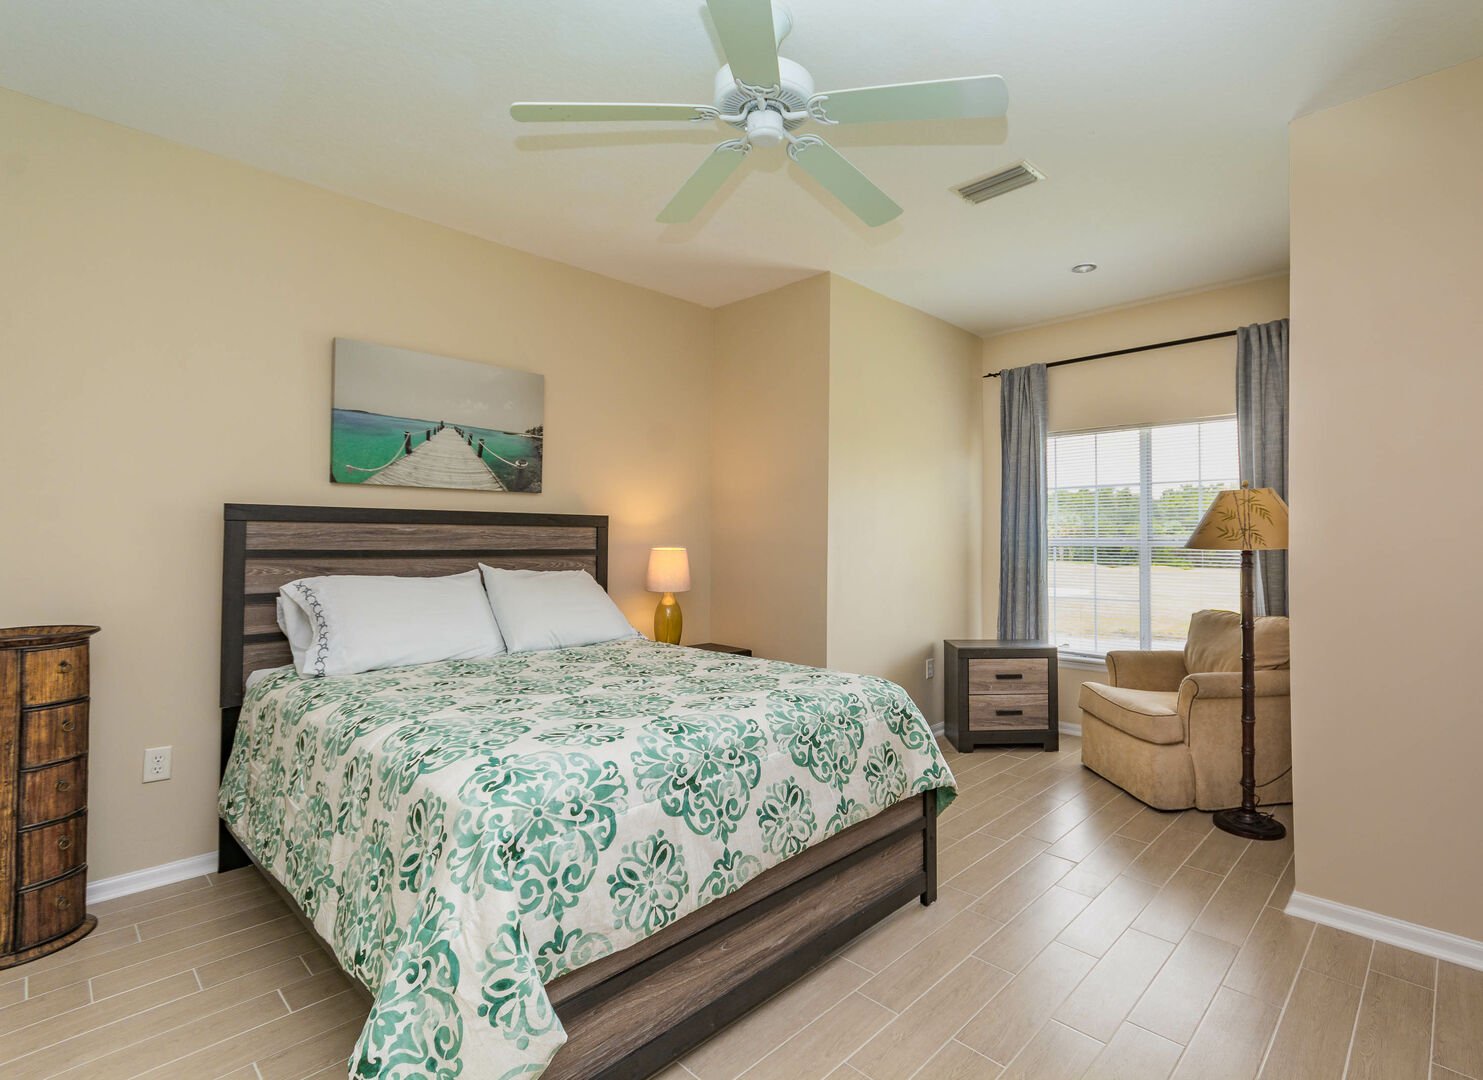 2nd bedroom of this New Smyrna beach Florida vacation home with a queen-sized bed, armchair, and nightstand.